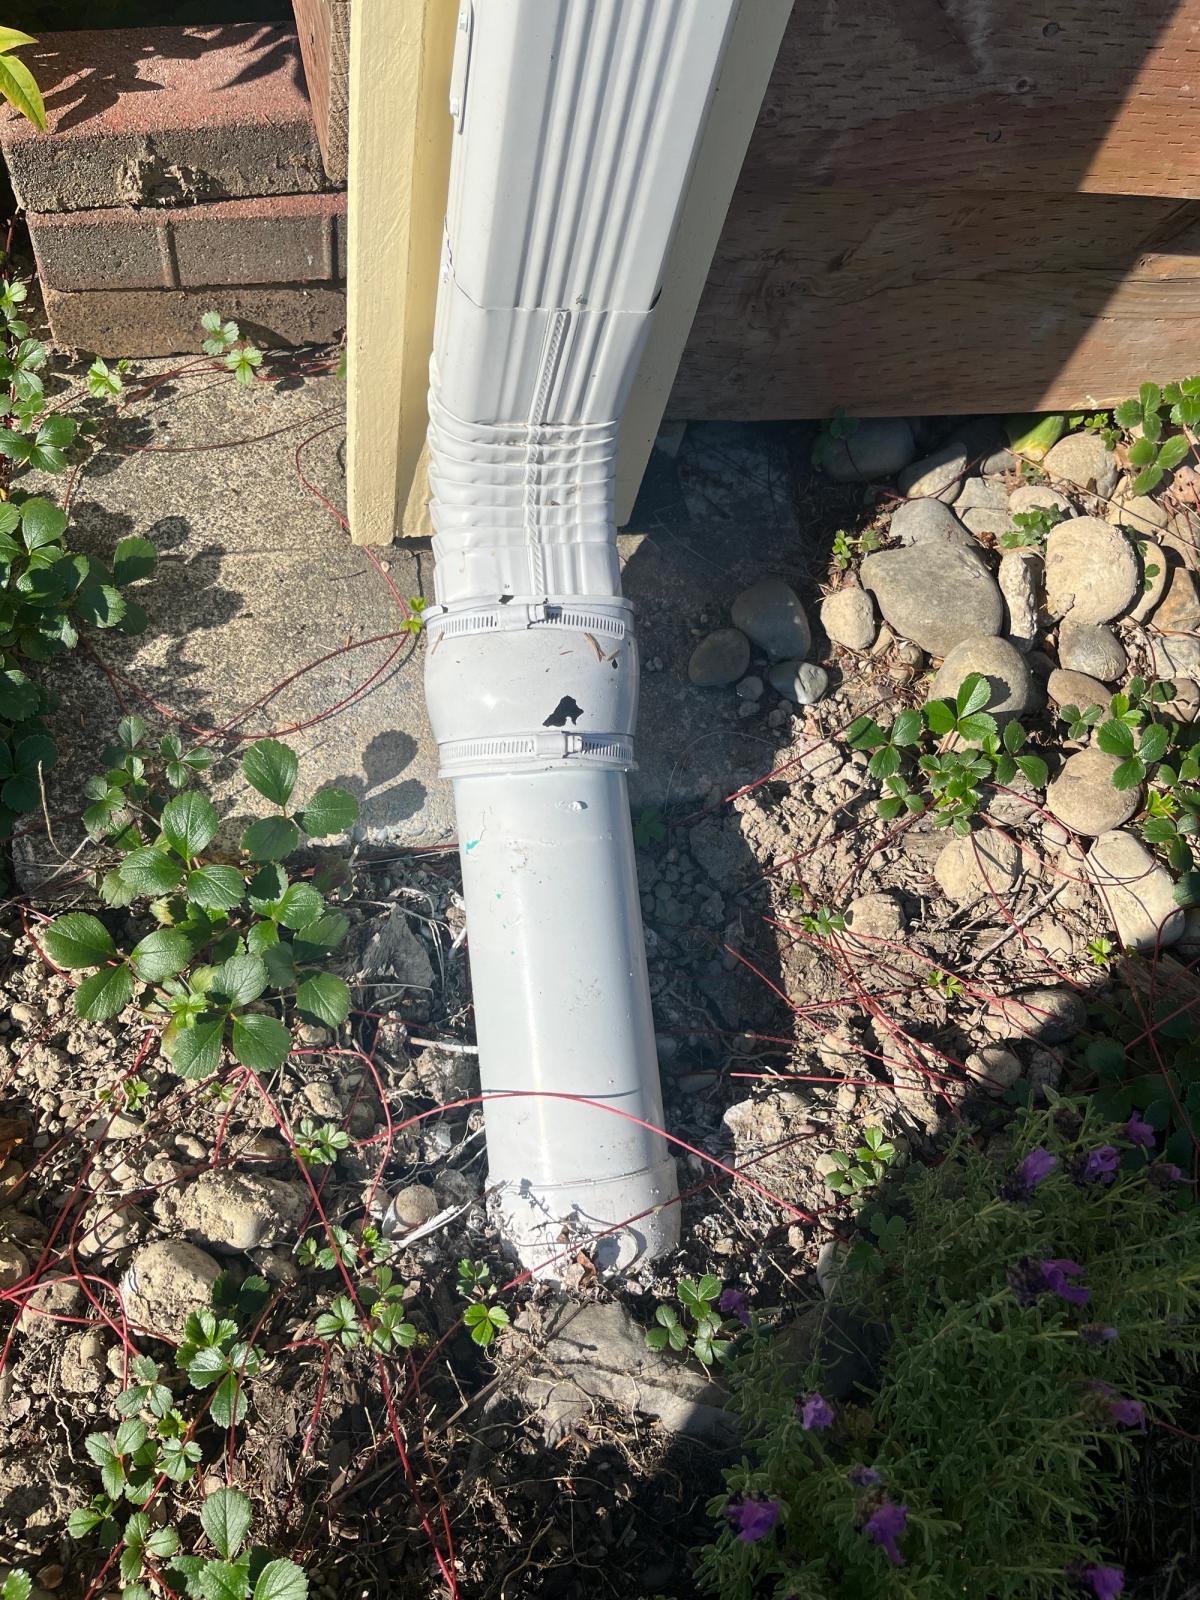 A gutter drain spout installed by FTS Excavation.